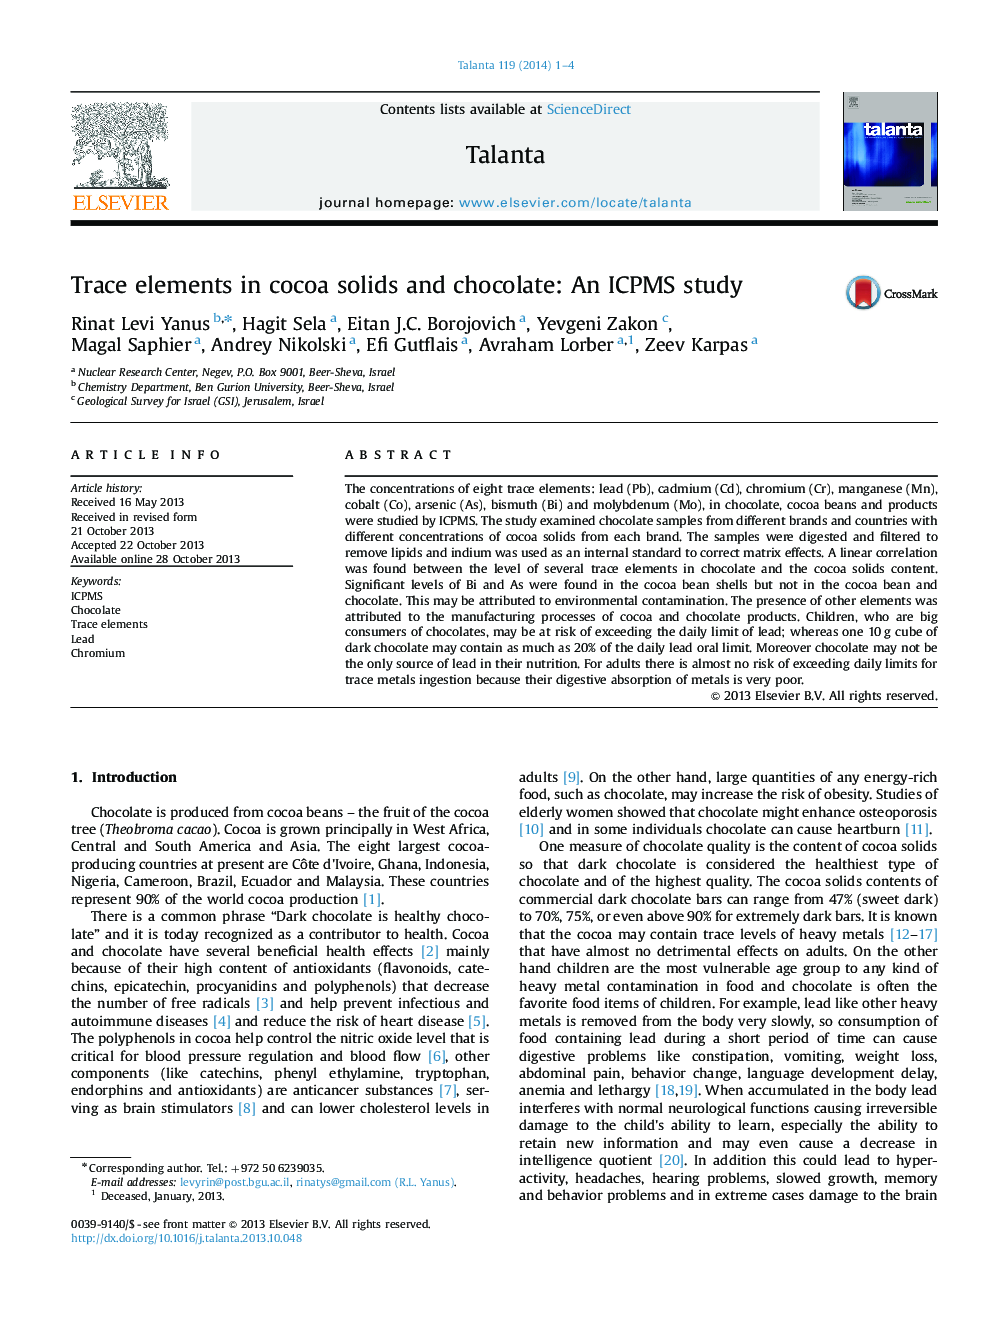 Trace elements in cocoa solids and chocolate: An ICPMS study